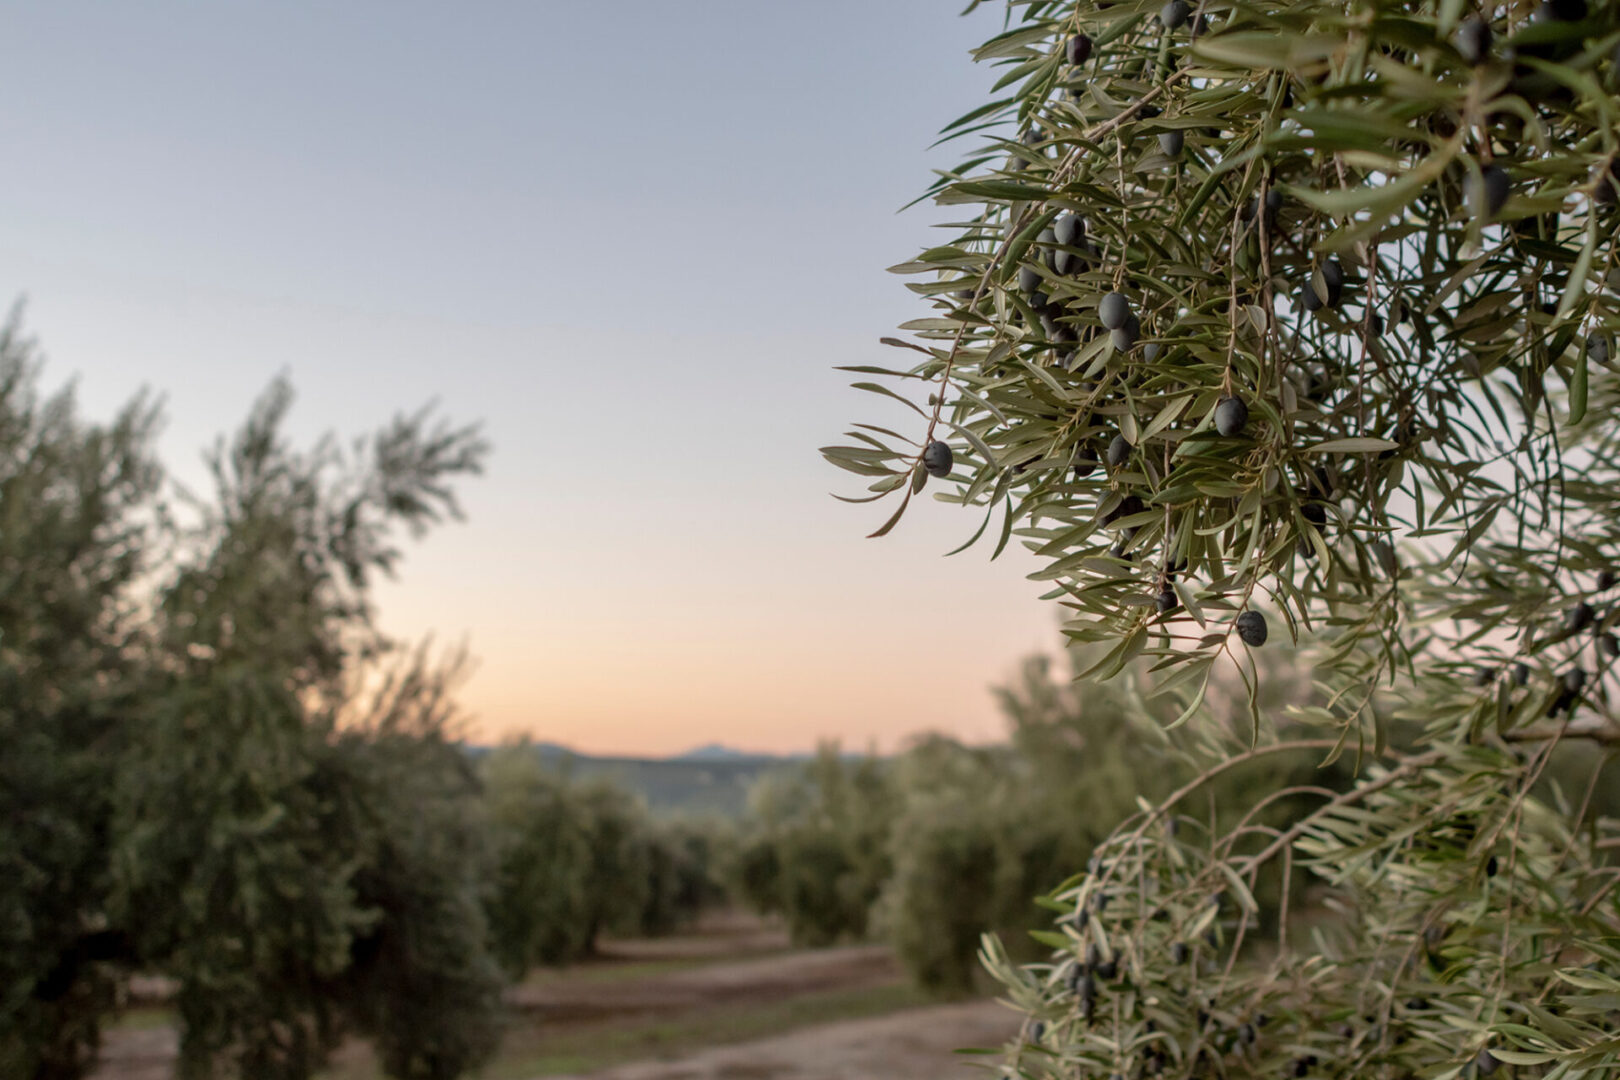 A view of an olive grove with trees in the background.